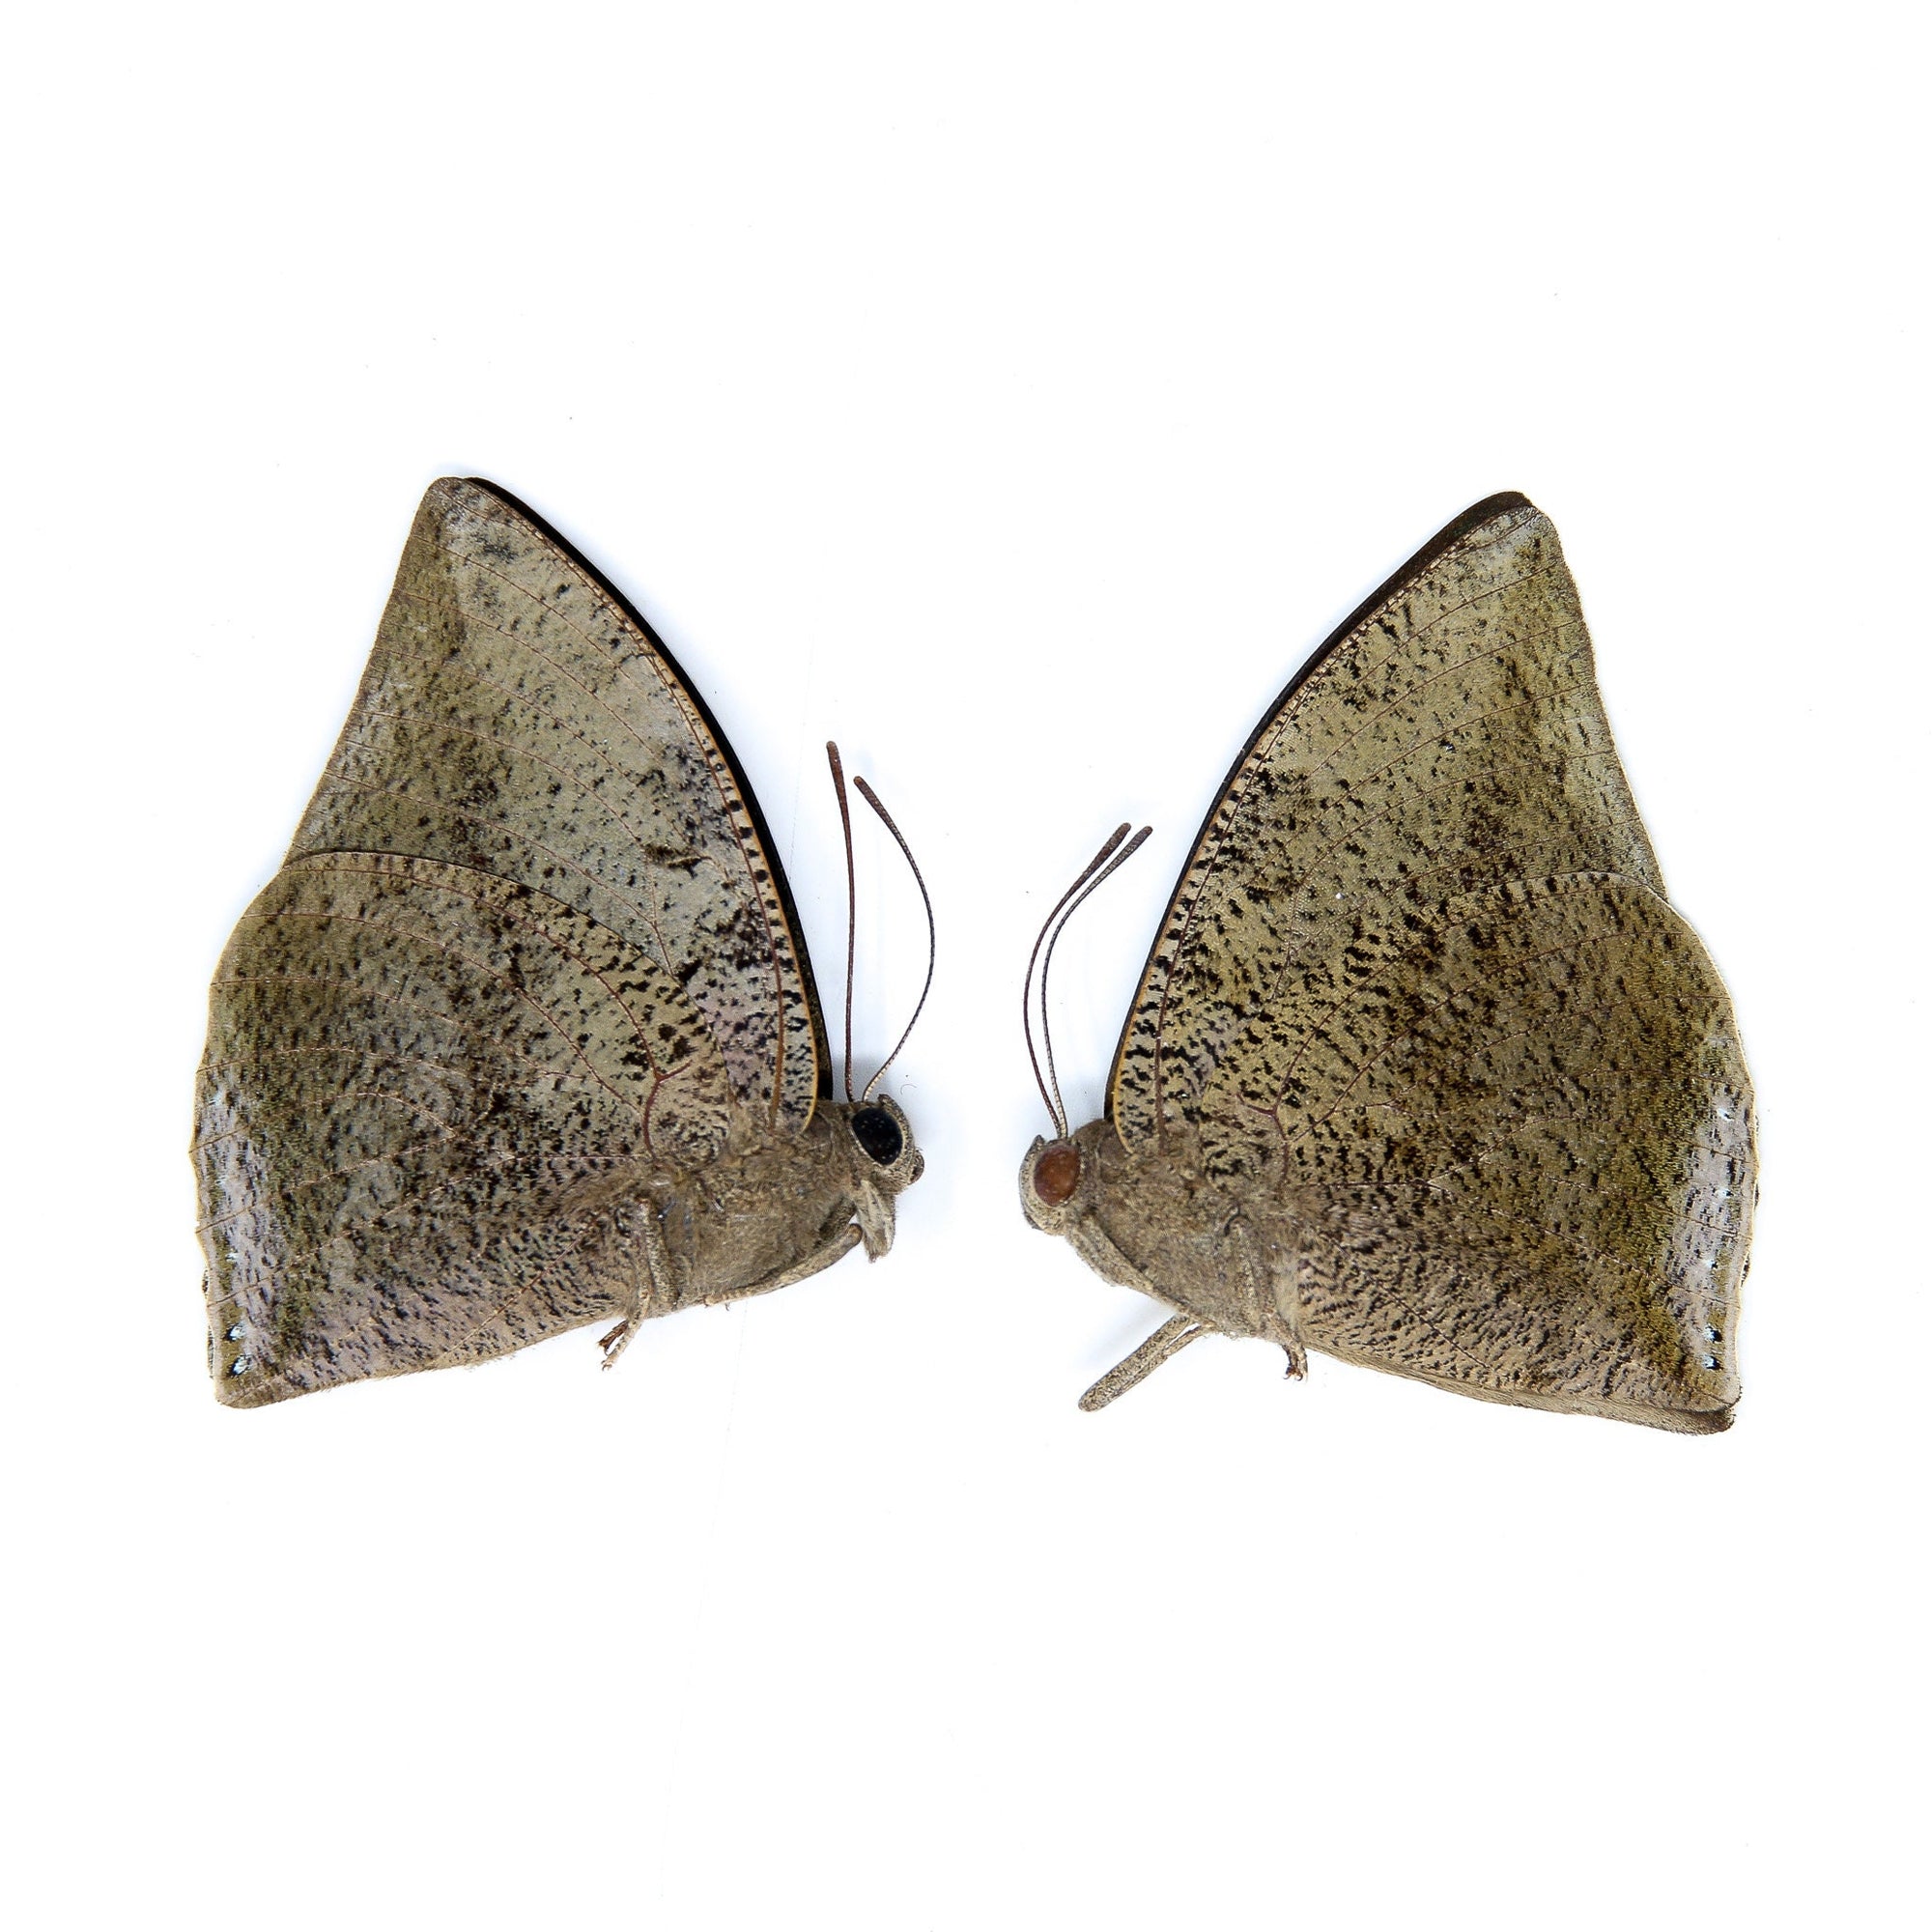 Two (2) Anaea xenocrates, A1 Real Dry-Preserved Butterflies, Unmounted Entomology Taxidermy Specimens